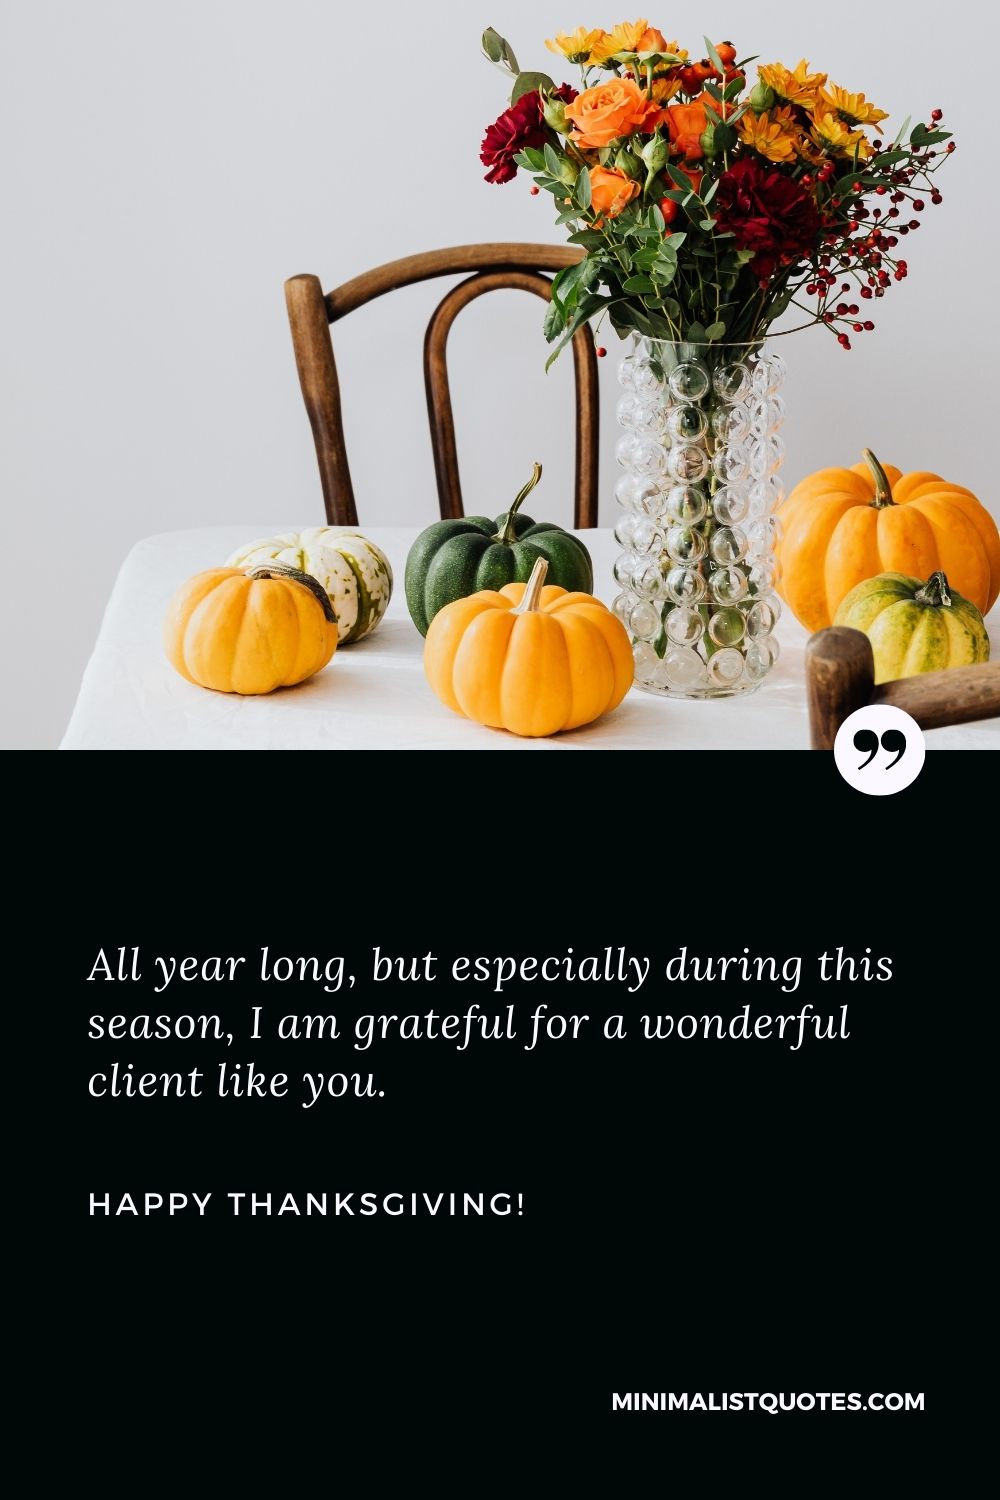 Thanksgiving wishes to clients: All year long, but especially during this season, I am grateful for a wonderful client like you. Happy Thanksgiving!